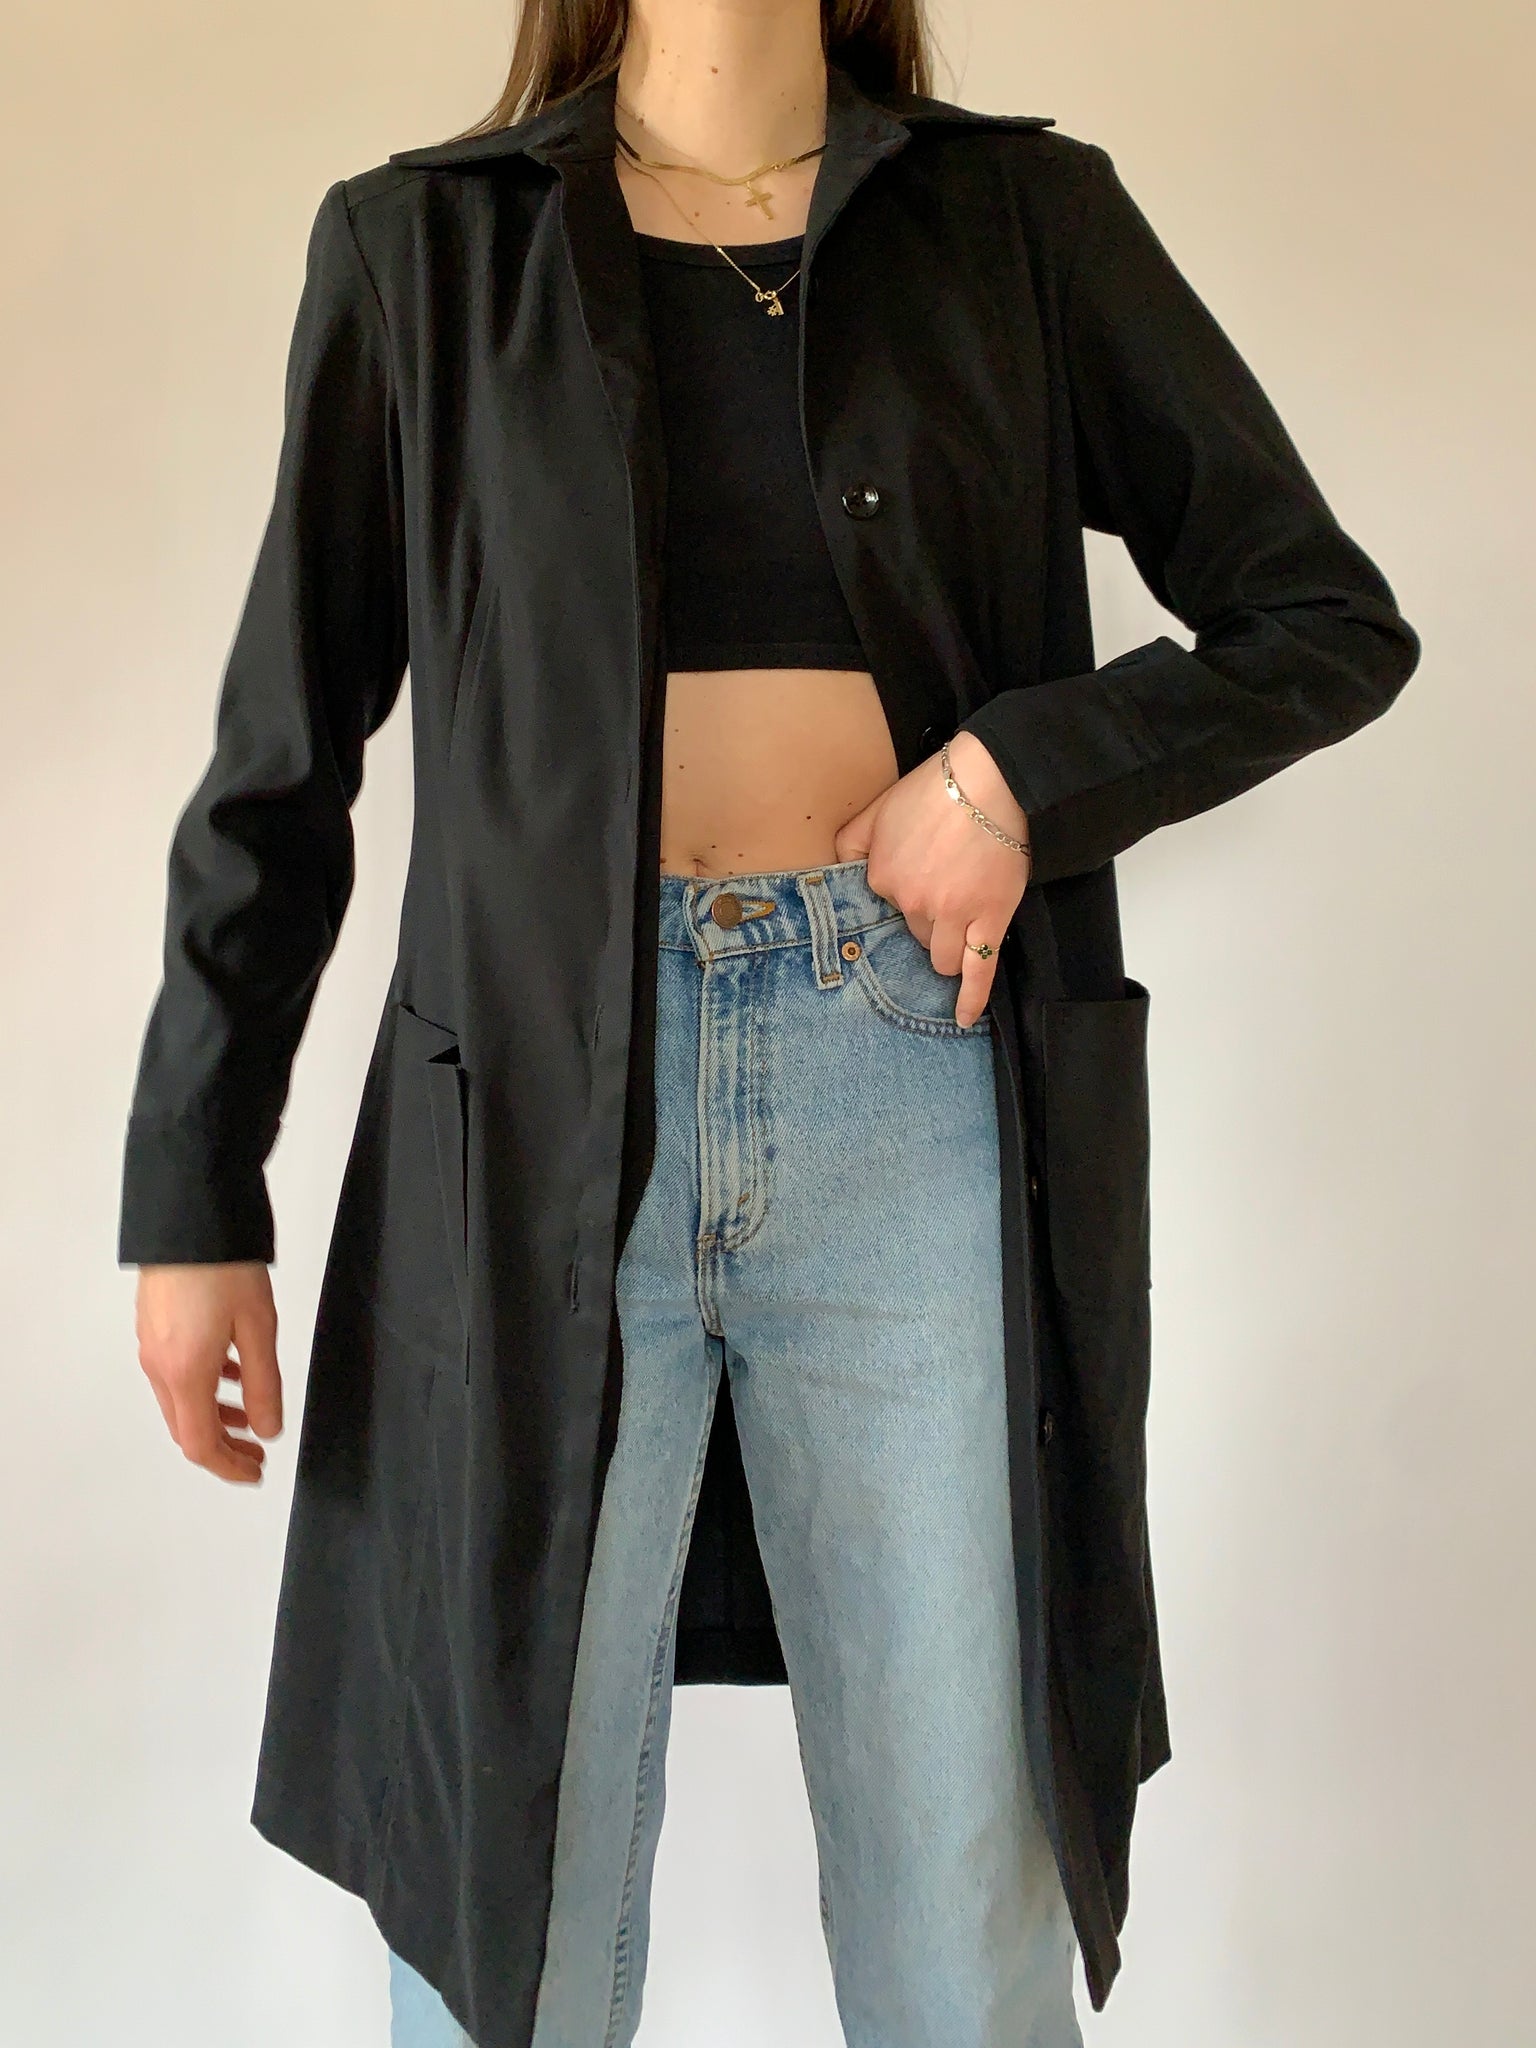 Vintage 1990s Trench